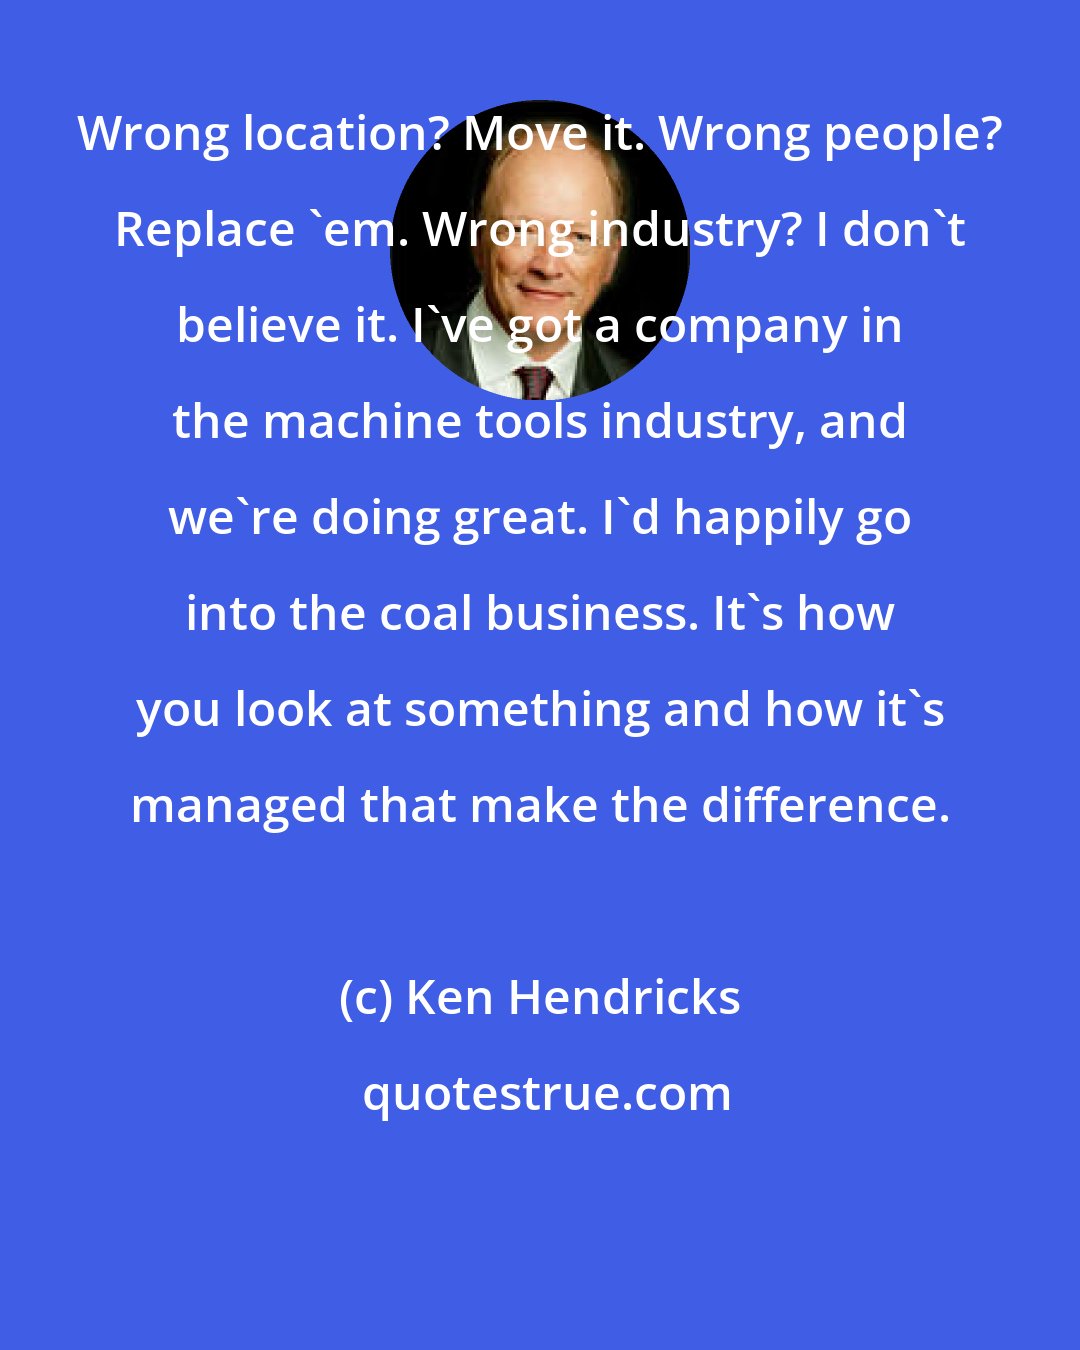 Ken Hendricks: Wrong location? Move it. Wrong people? Replace 'em. Wrong industry? I don't believe it. I've got a company in the machine tools industry, and we're doing great. I'd happily go into the coal business. It's how you look at something and how it's managed that make the difference.